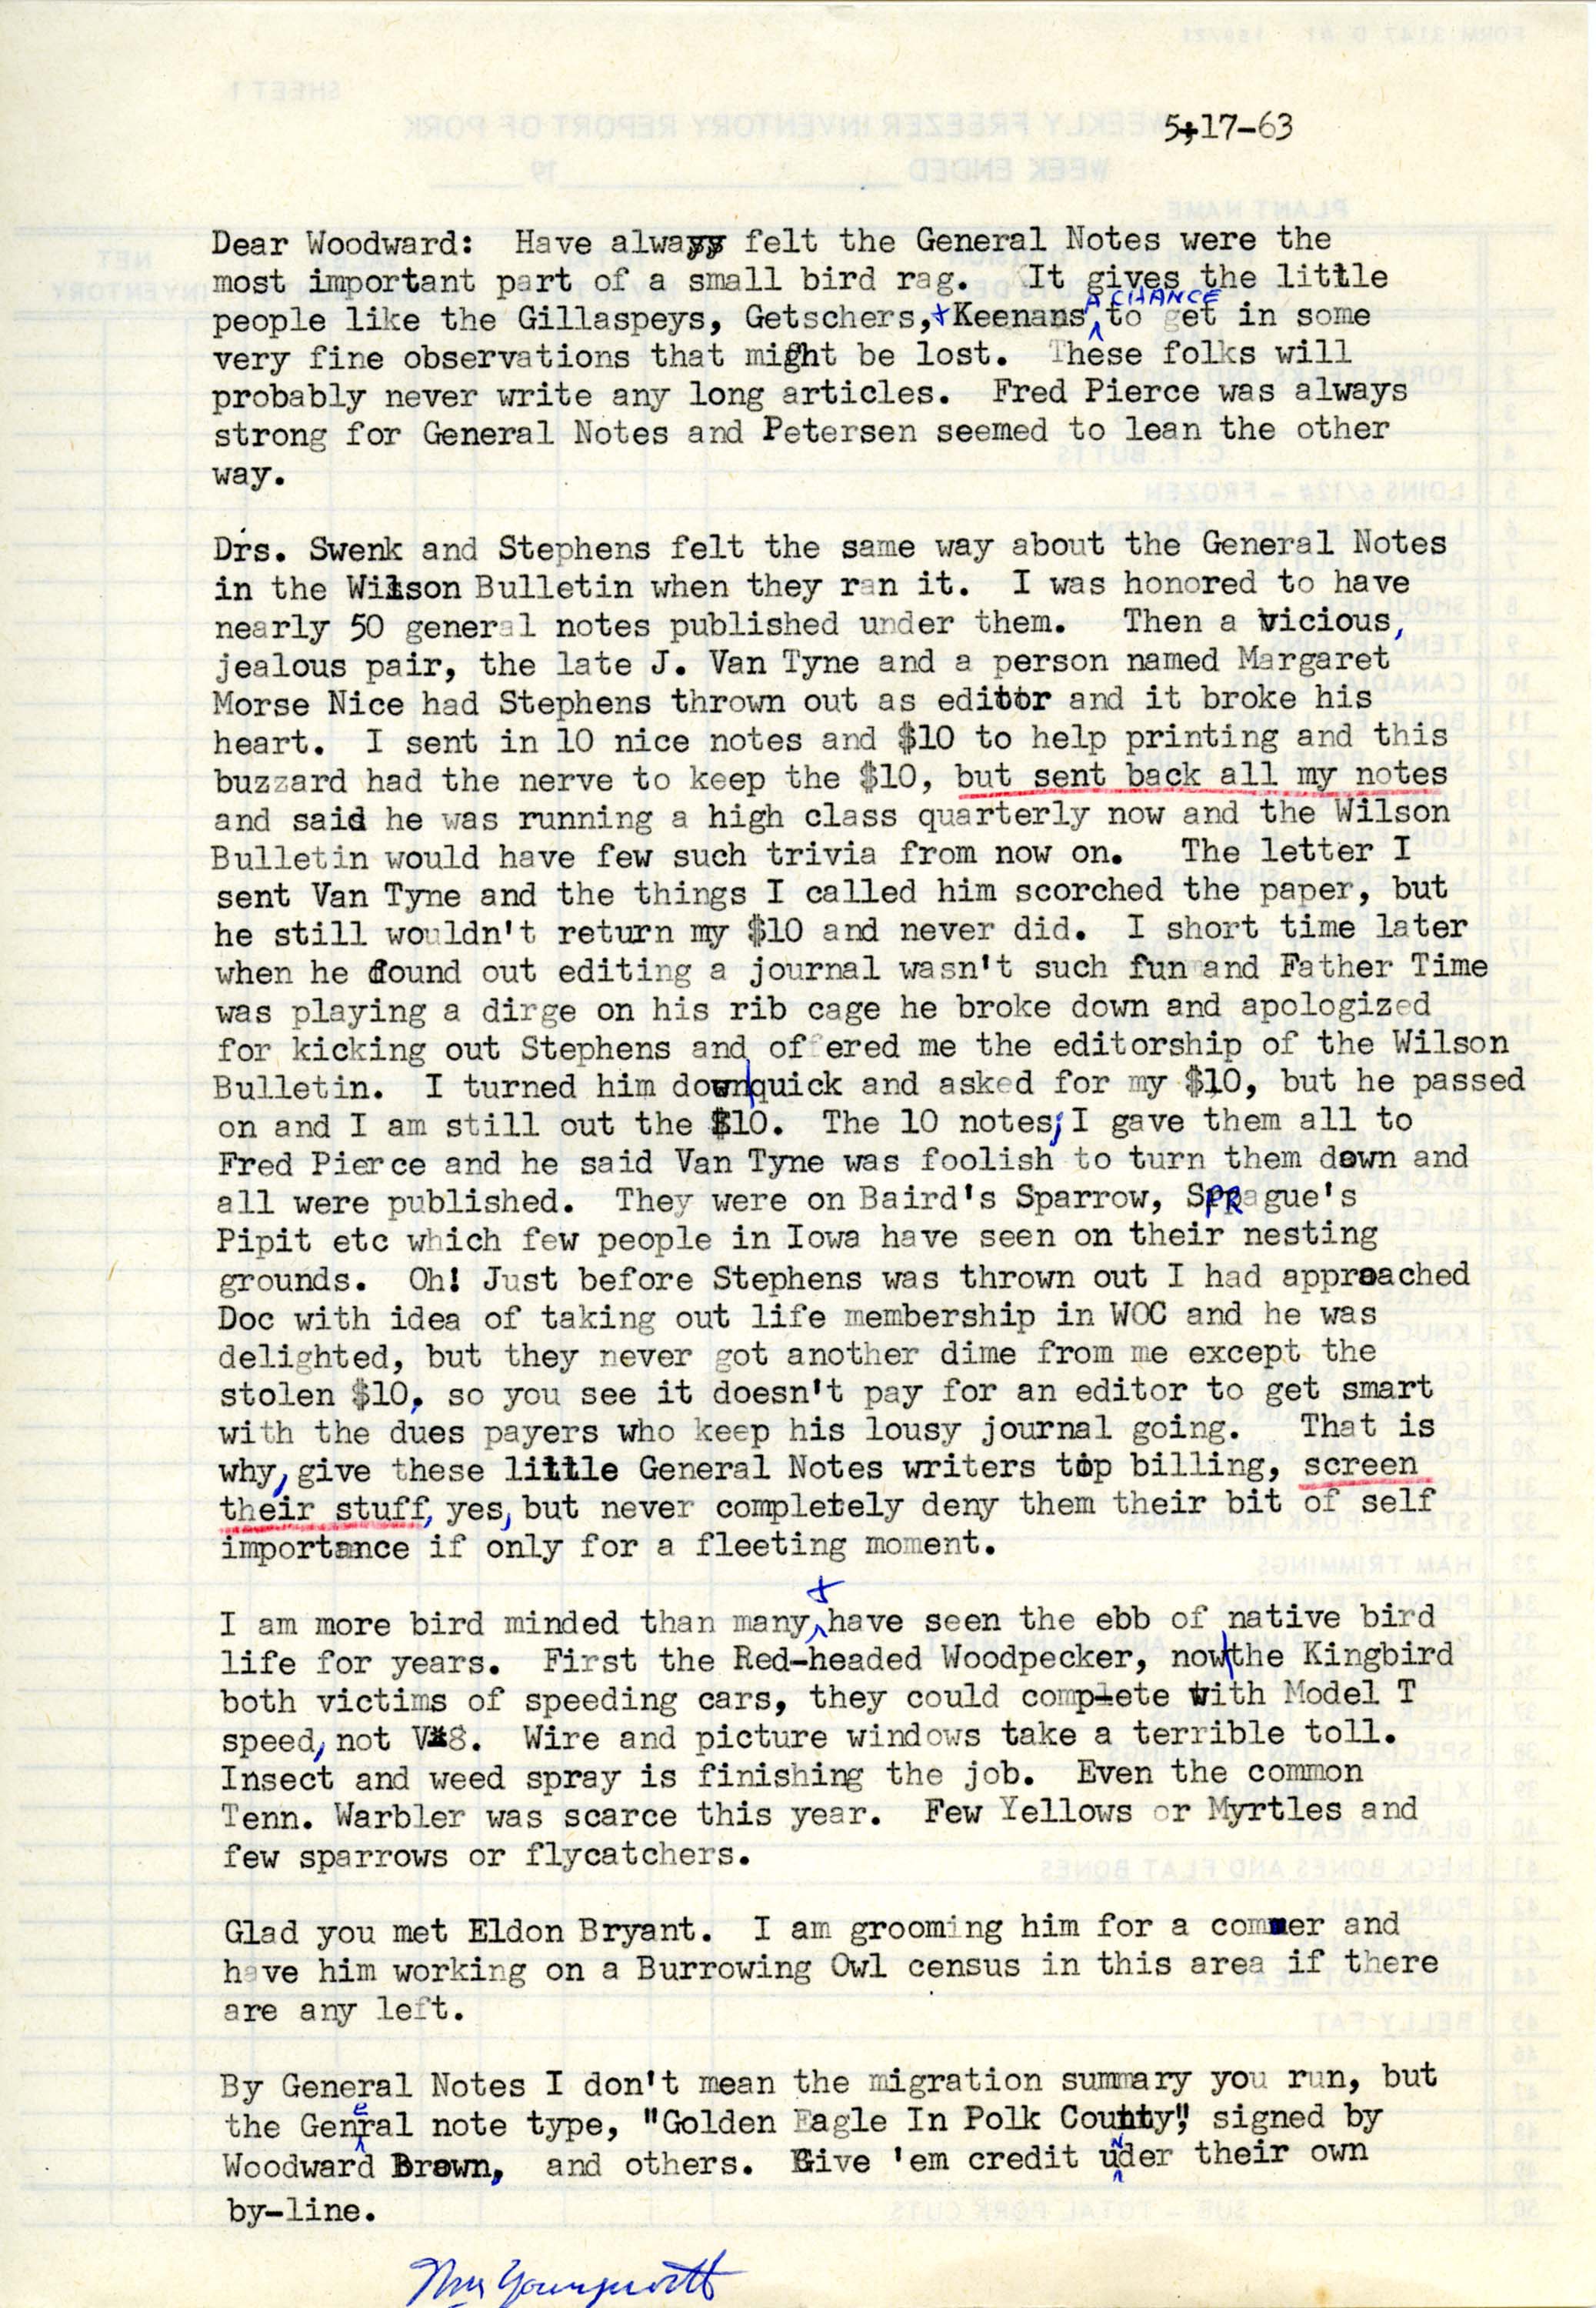 Bill Youngworth letter to Woodward Hart Brown regarding general bird notes, May 17, 1963